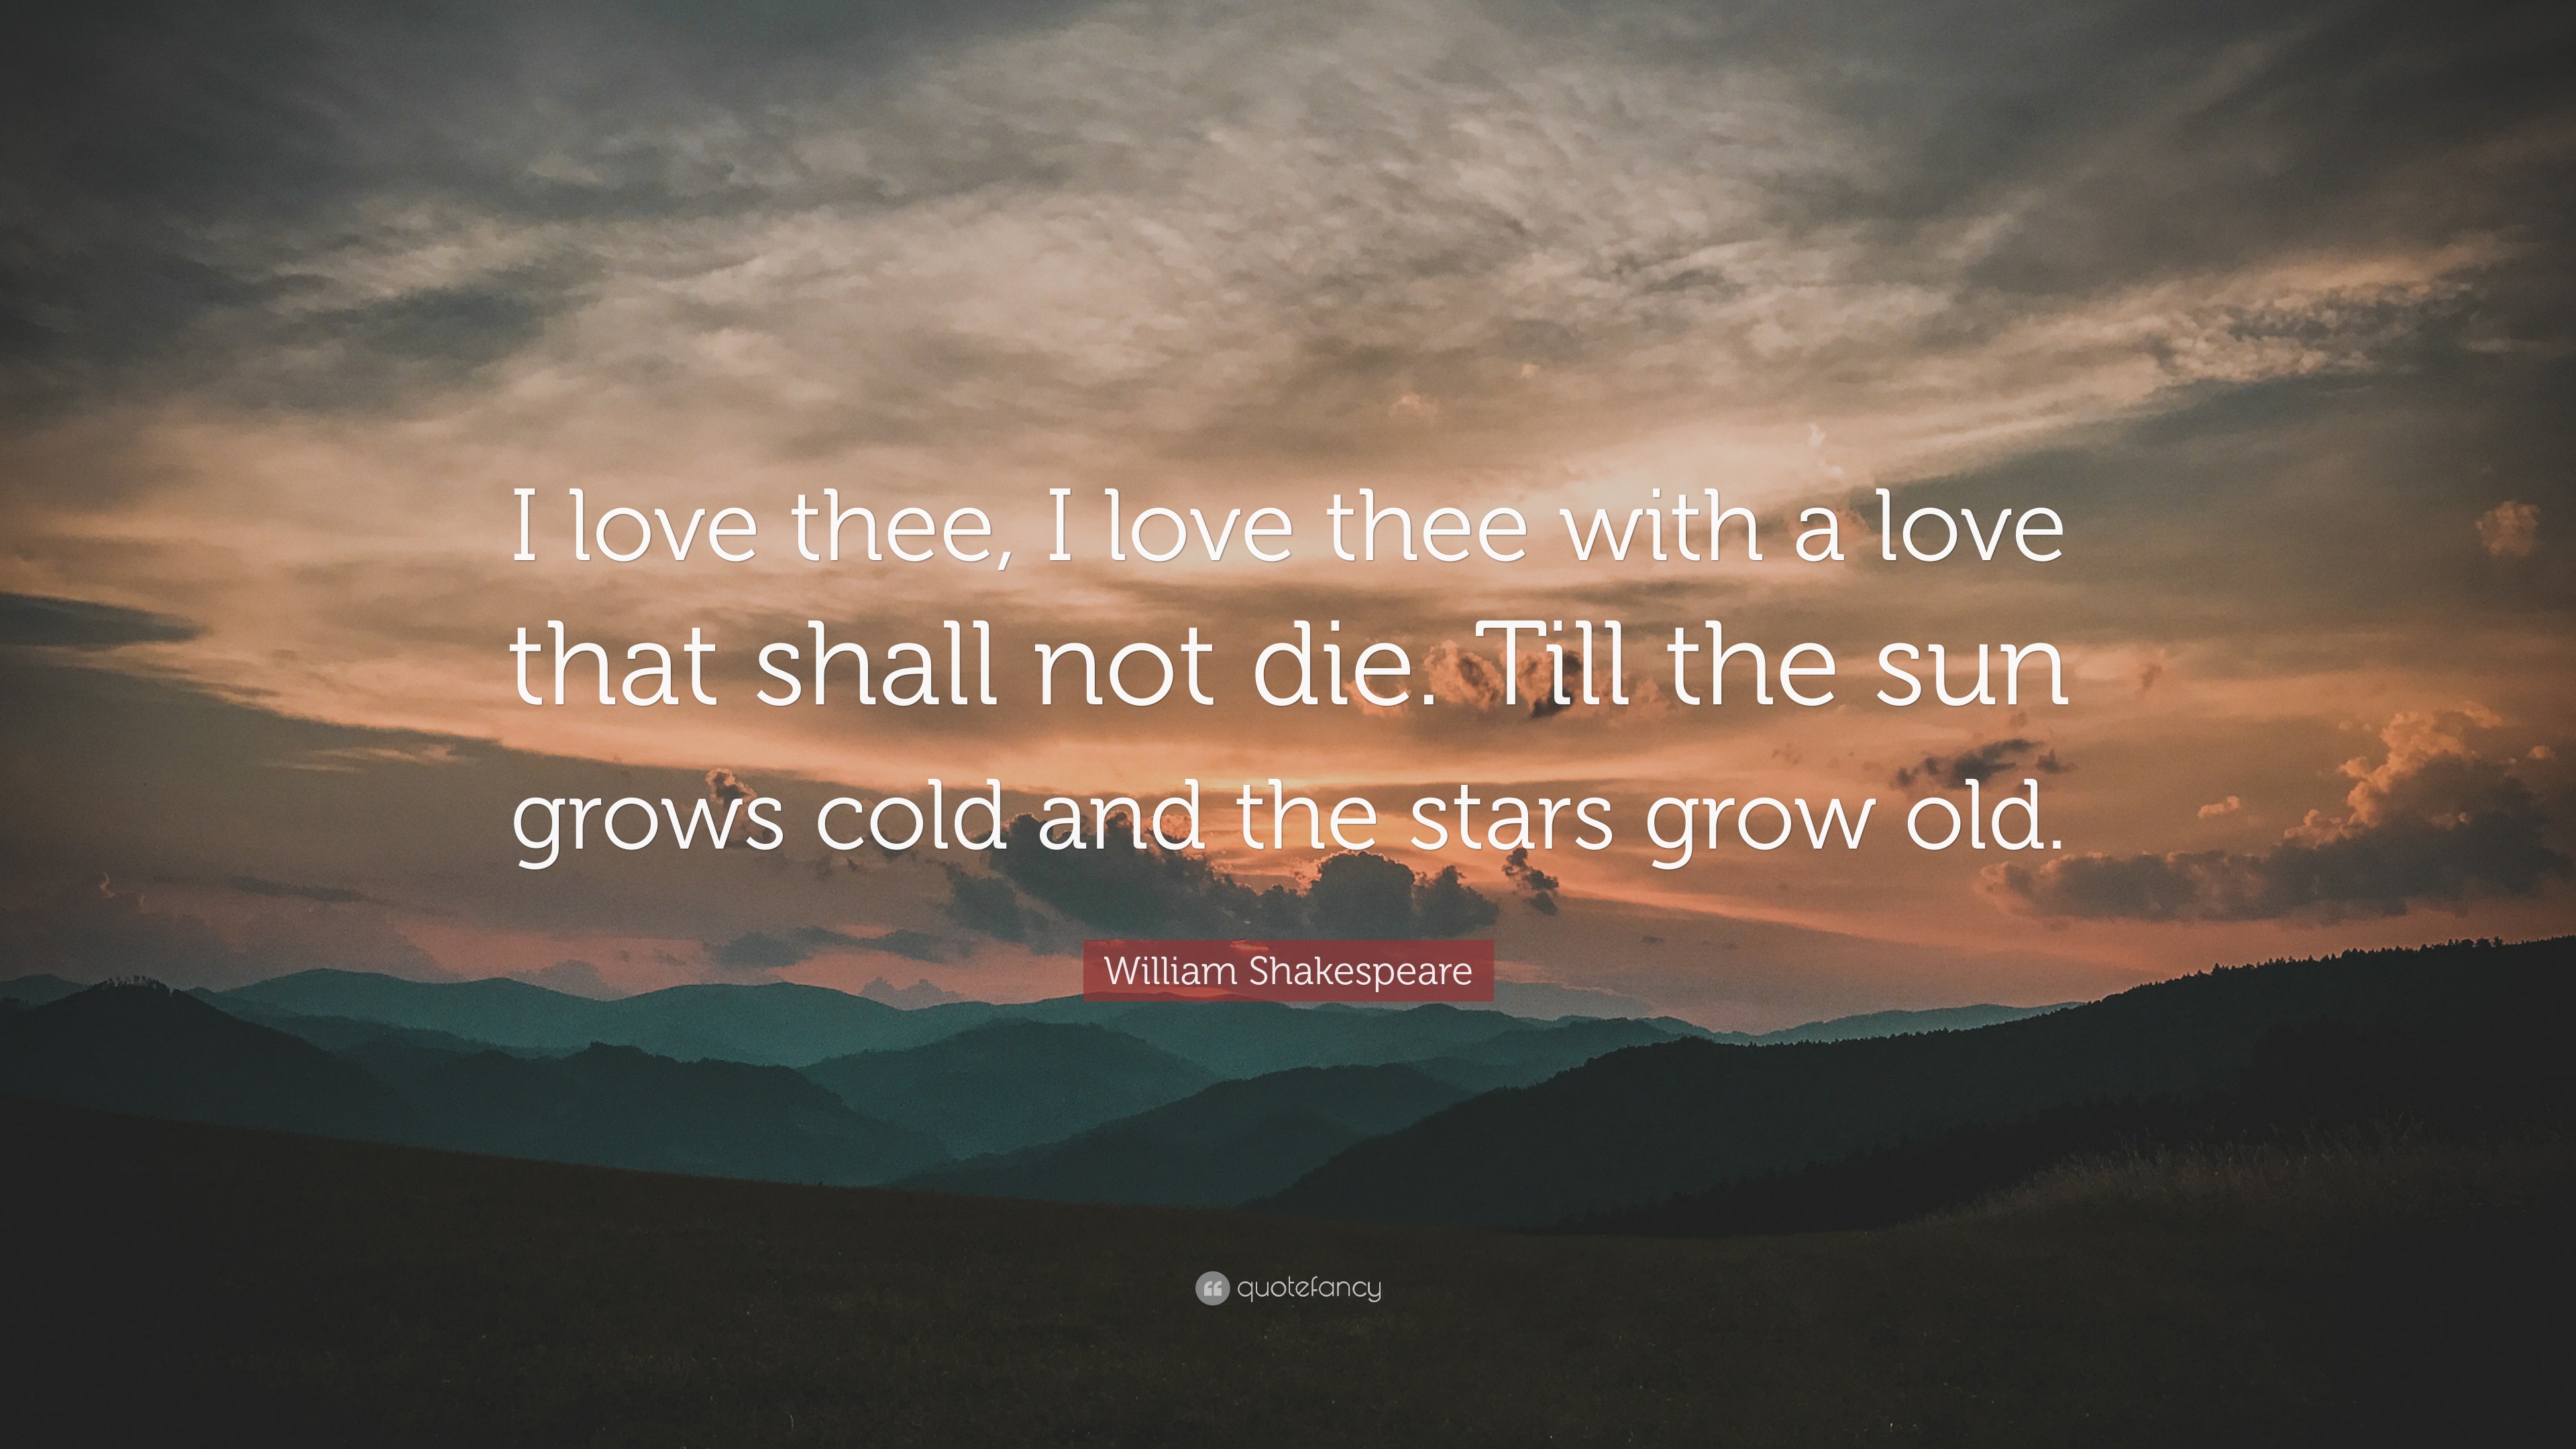 William Shakespeare Quote I Love Thee I Love Thee With A Love That Shall Not Die